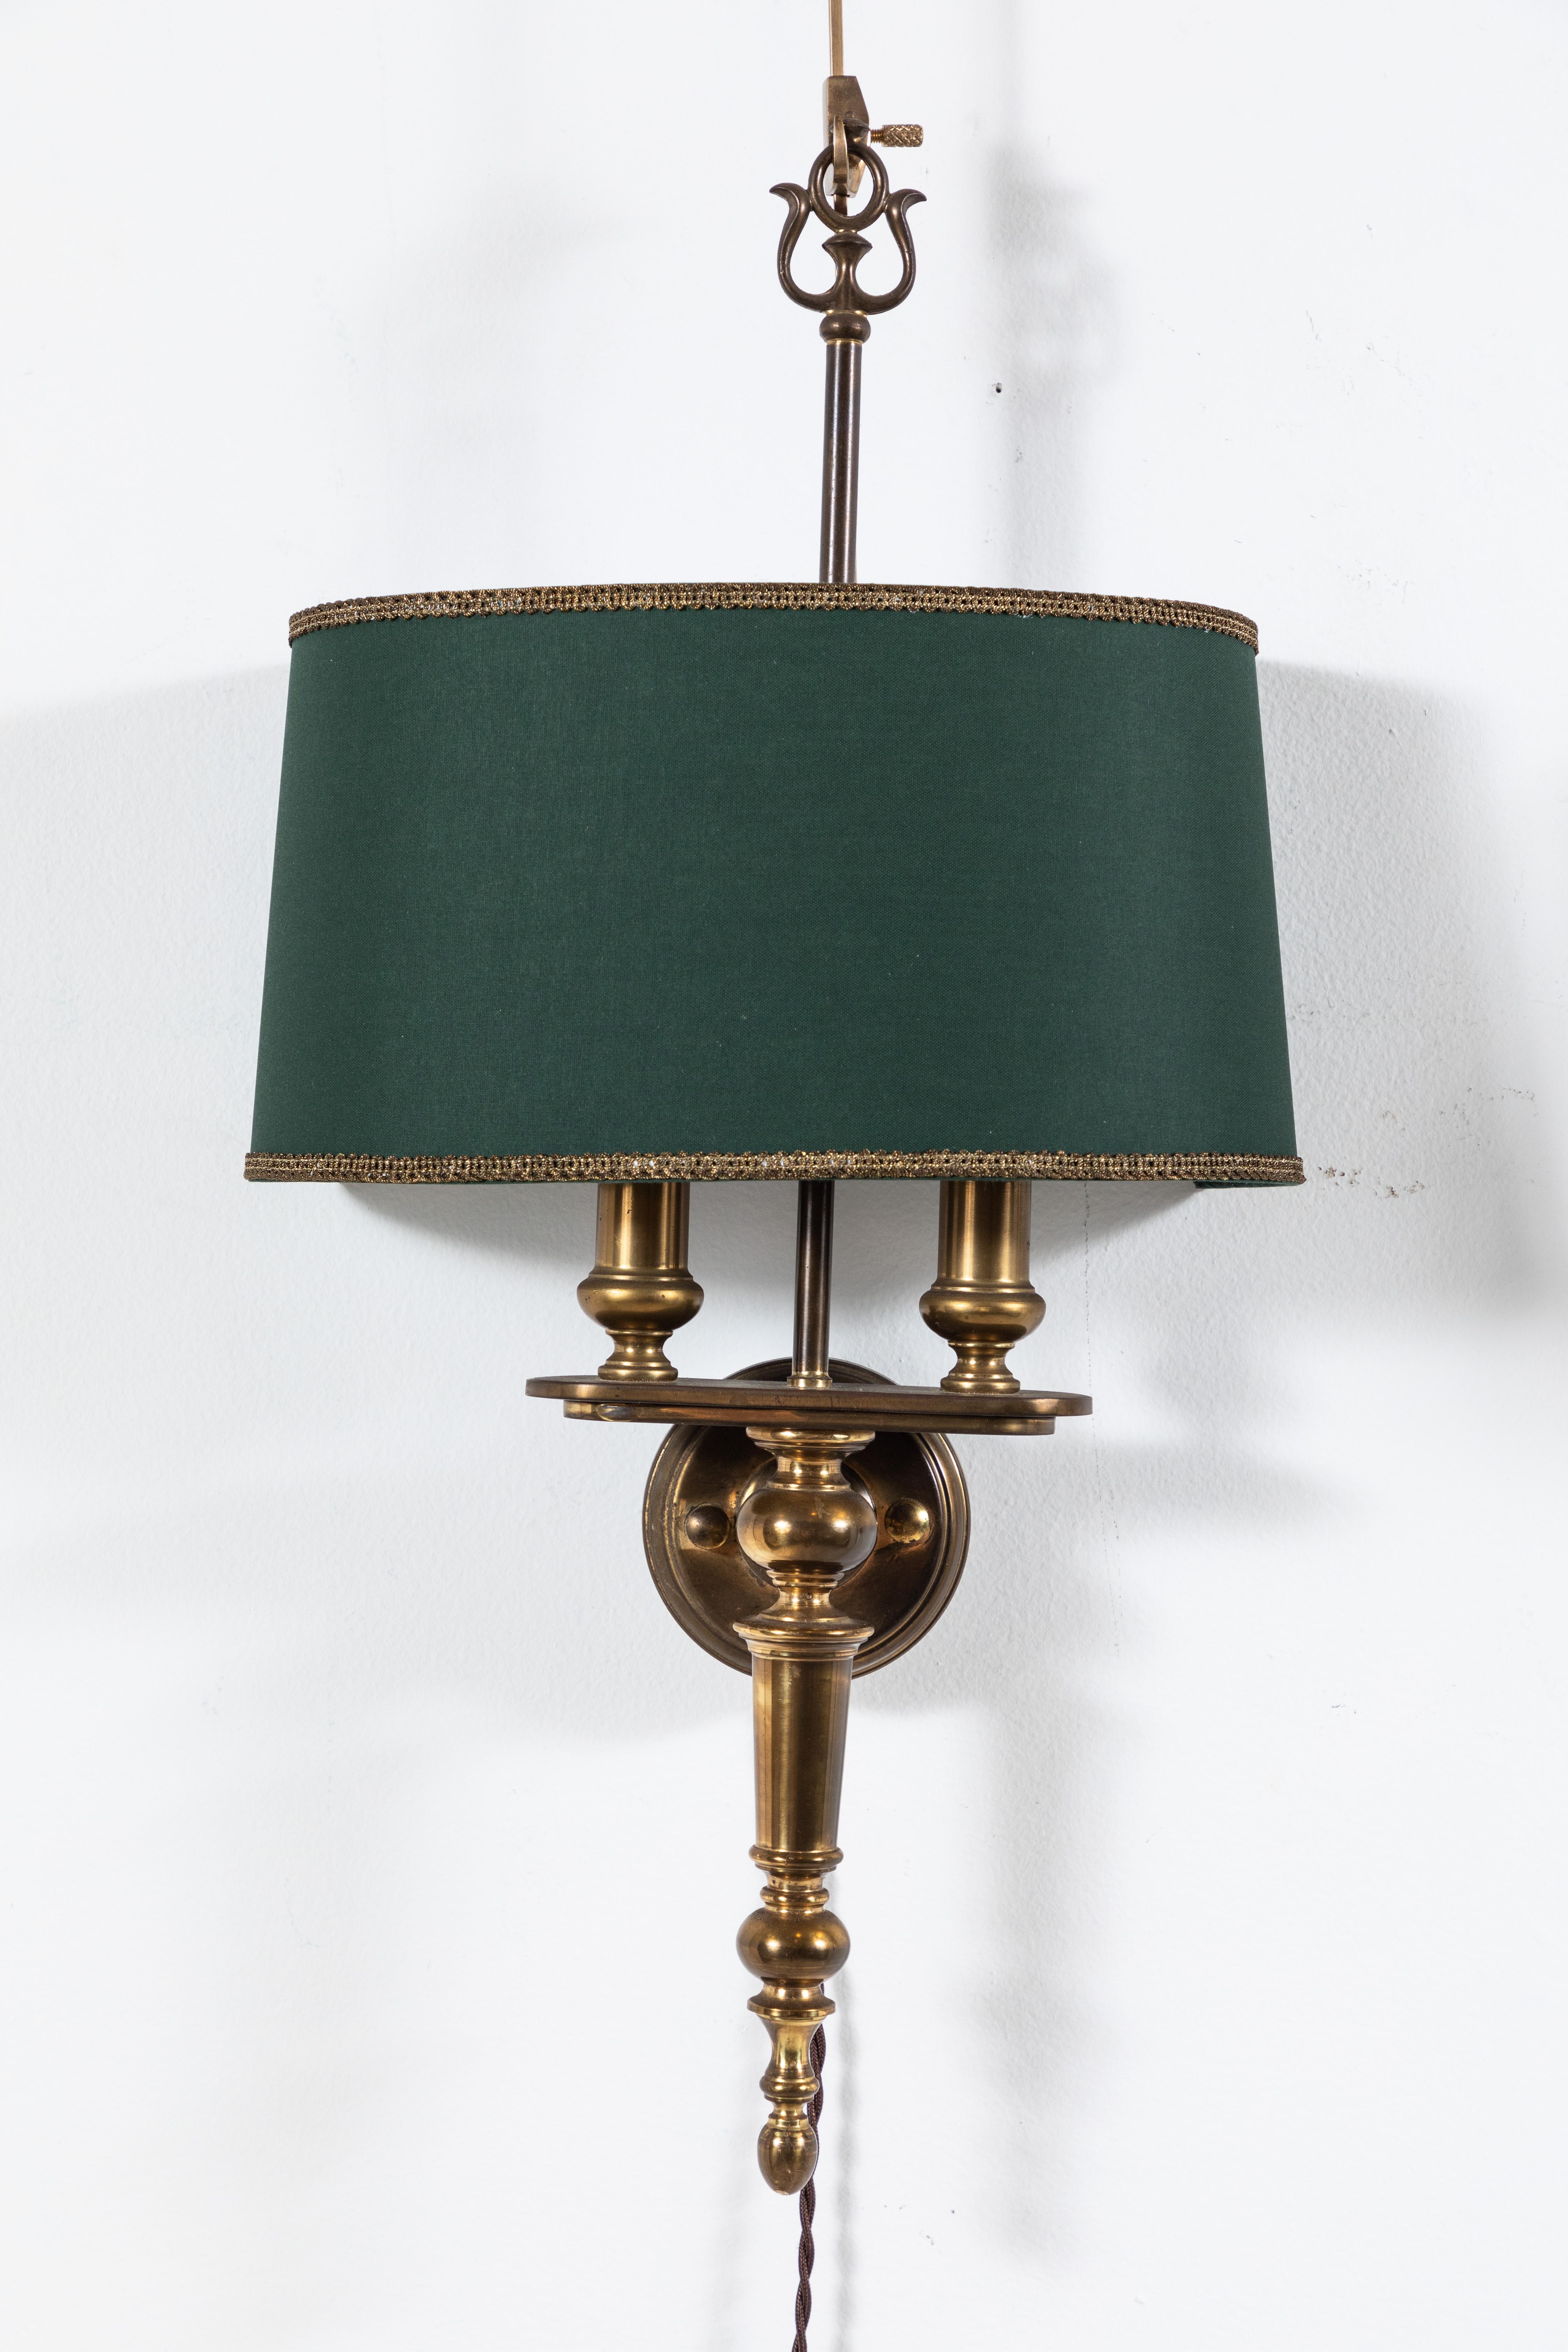 Beautiful Classical inspired pair of French brass two socket sconces with green book cloth shade with gold trim on the top and bottom.